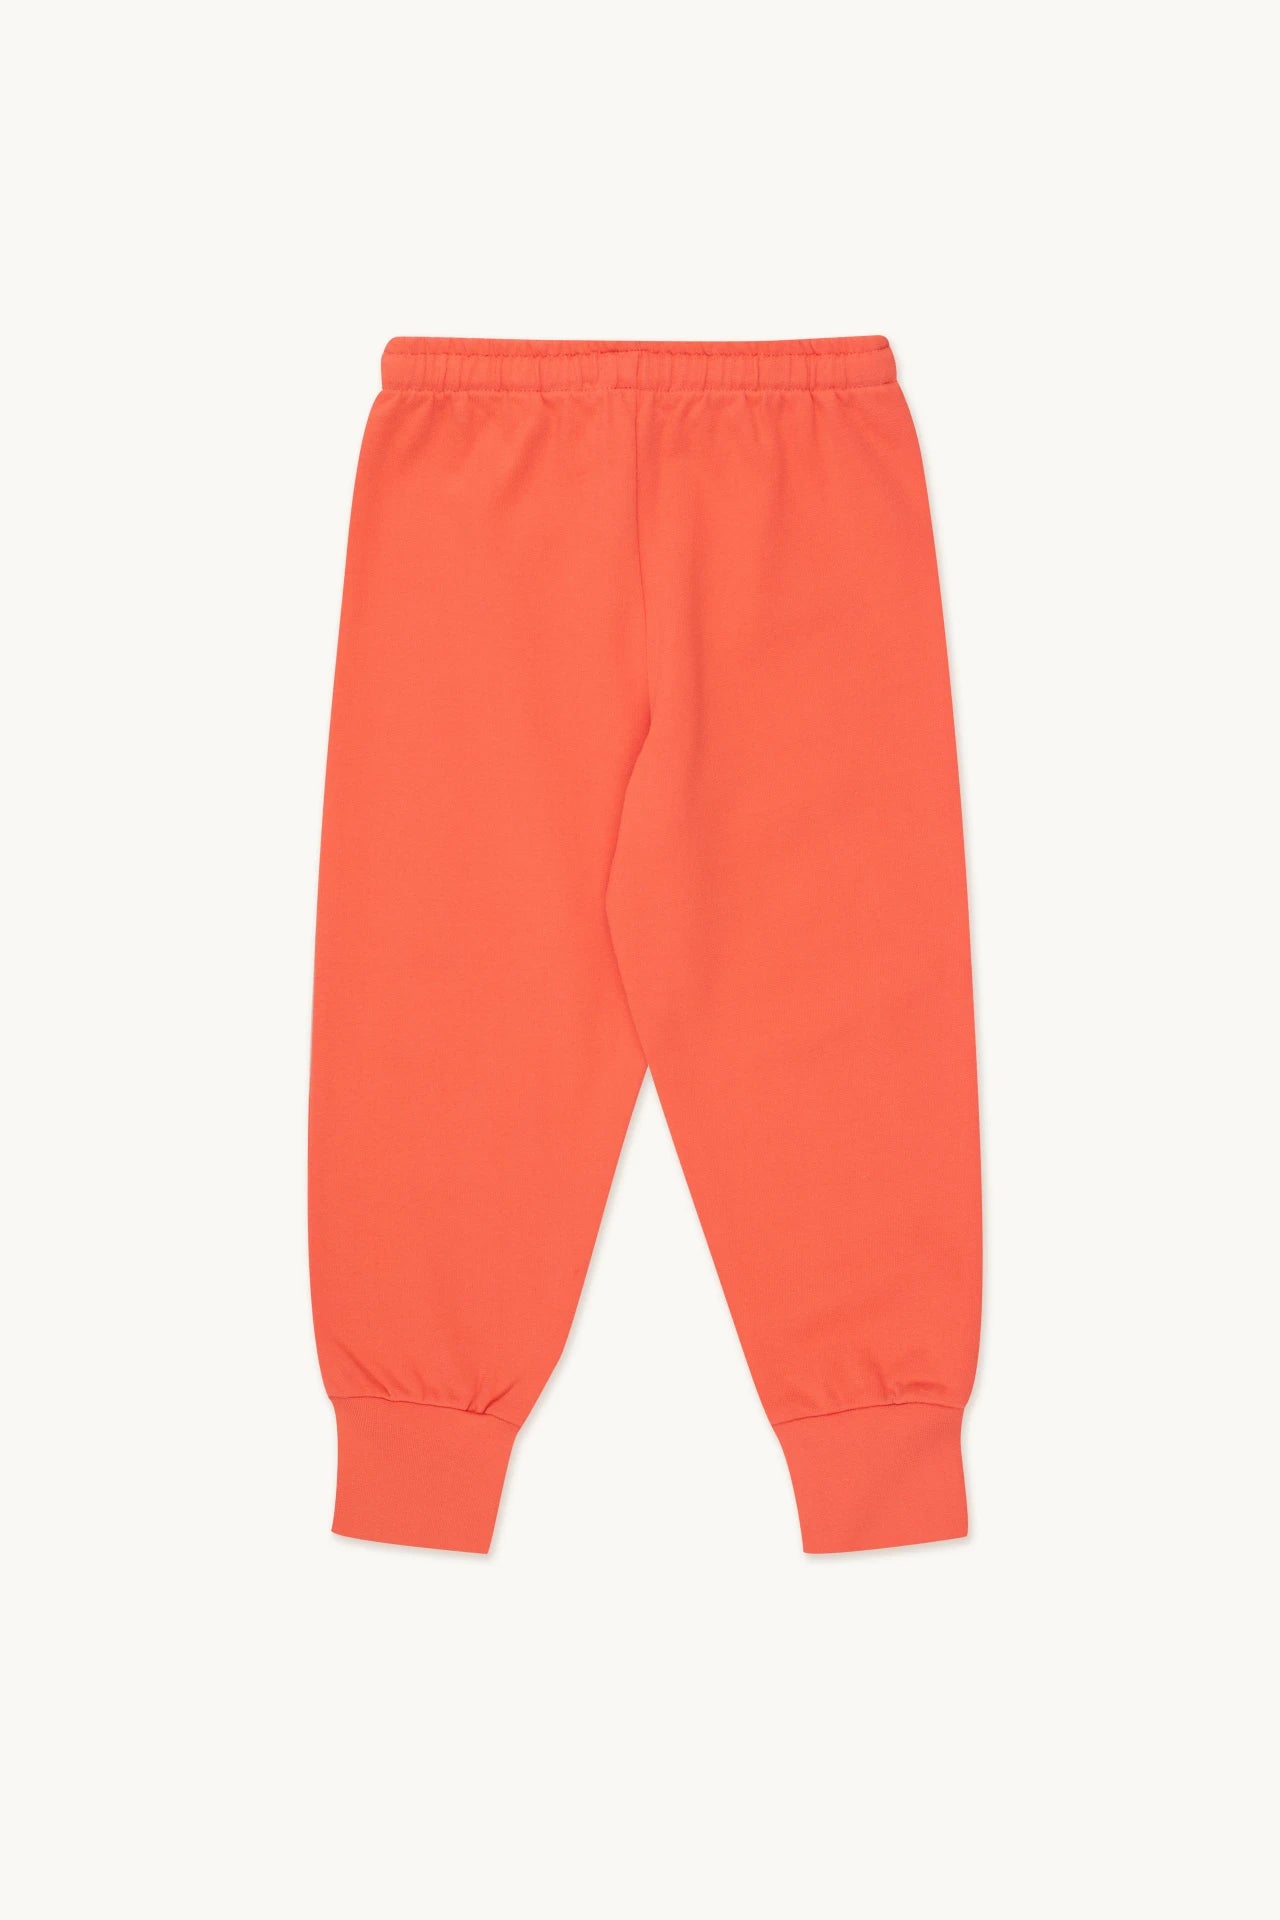 Tiny Cottons Star Sweatpant in Light Red